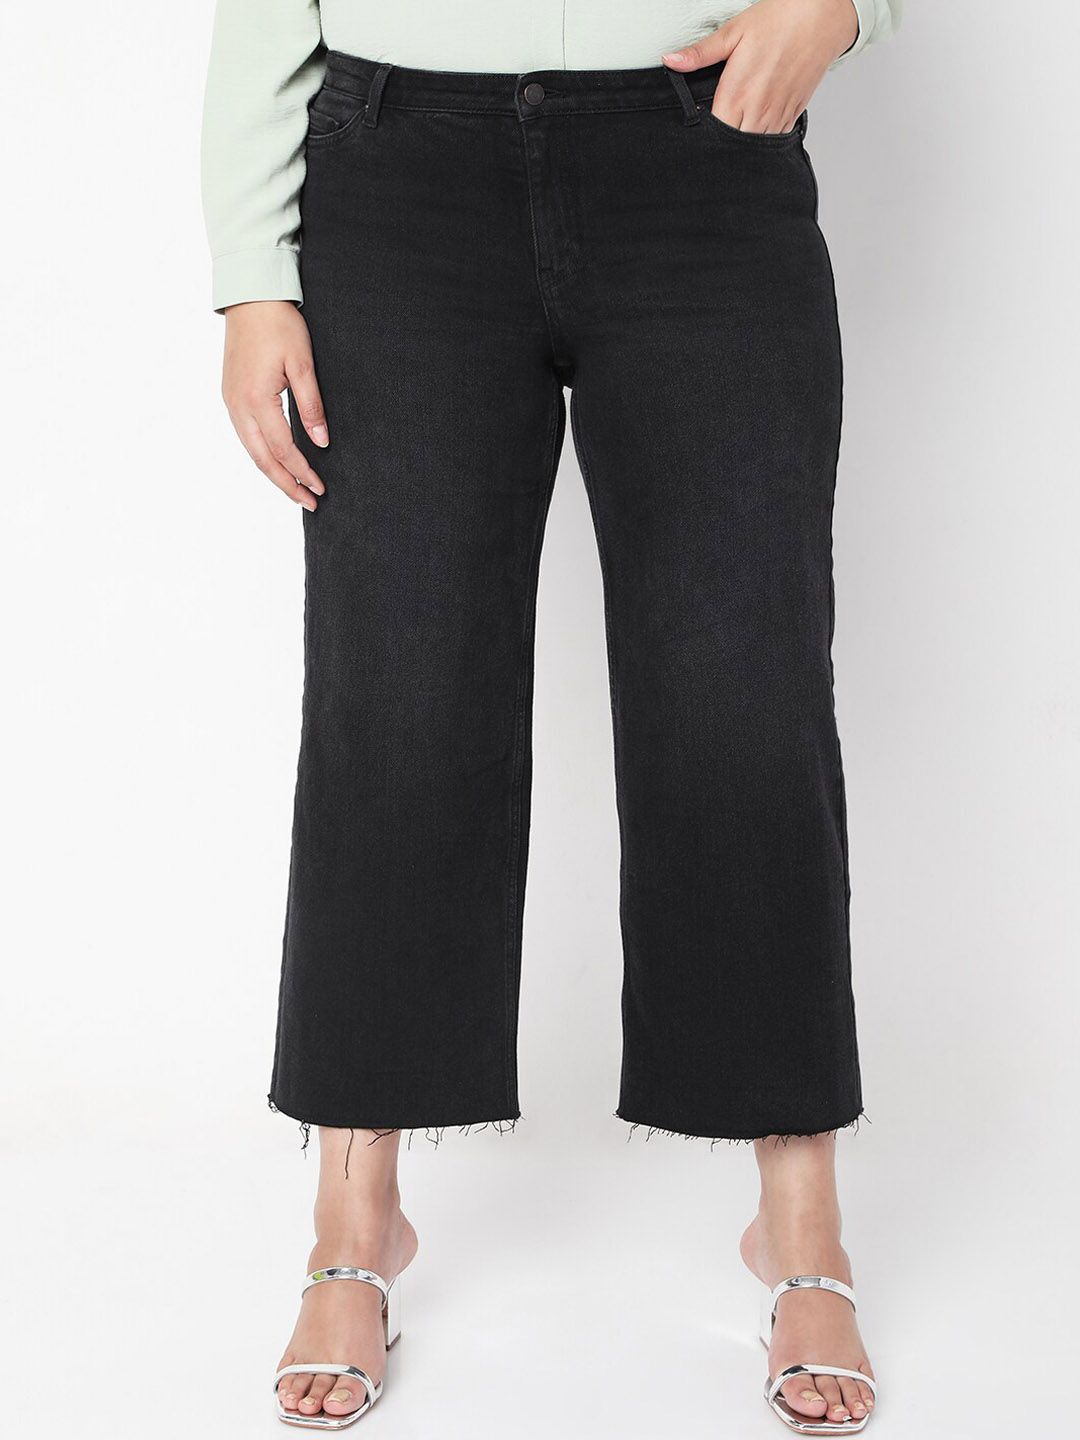 Vero Moda Women Black Relaxed Fit Light Fade Frayed Cotton Cropped Jeans Price in India